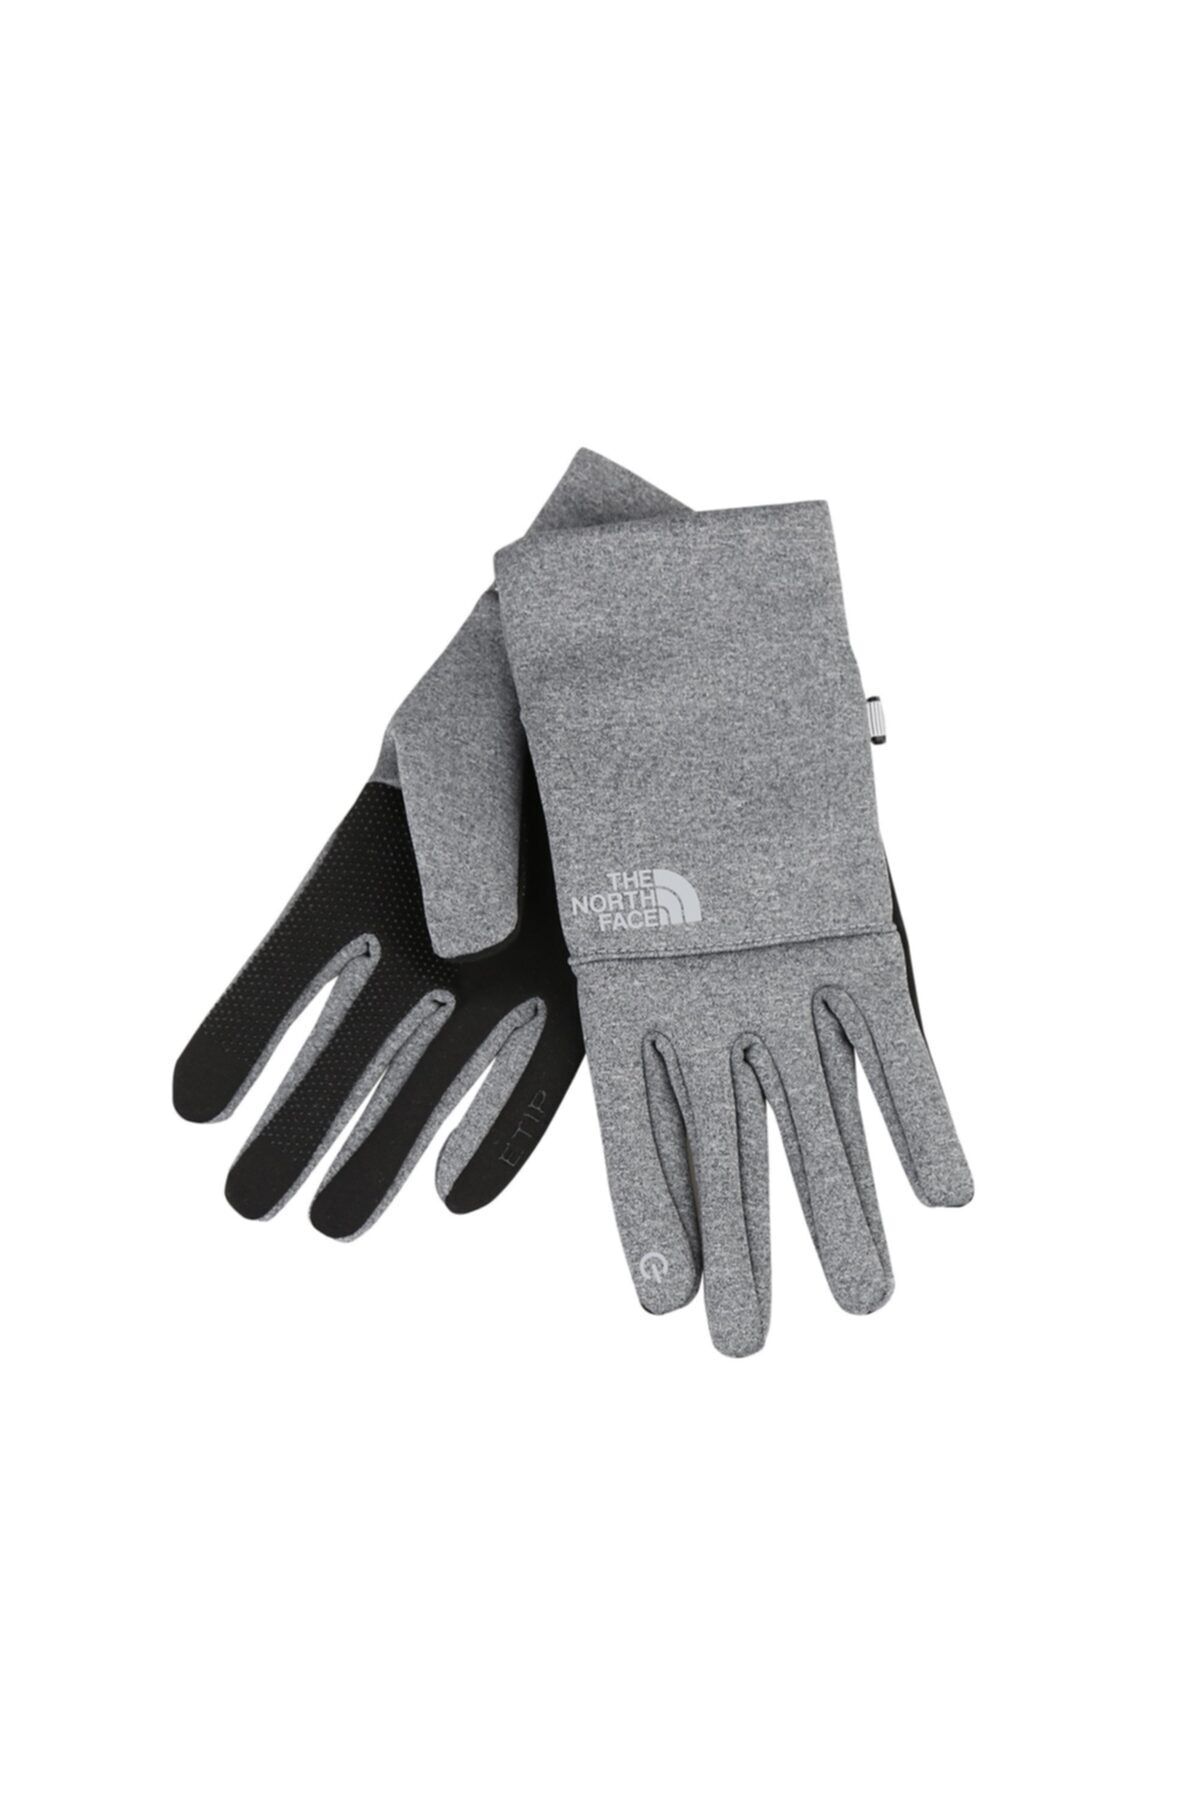 The North Face Etip Recycled Glove Eldiven Nf0a4shadyy1 Gri